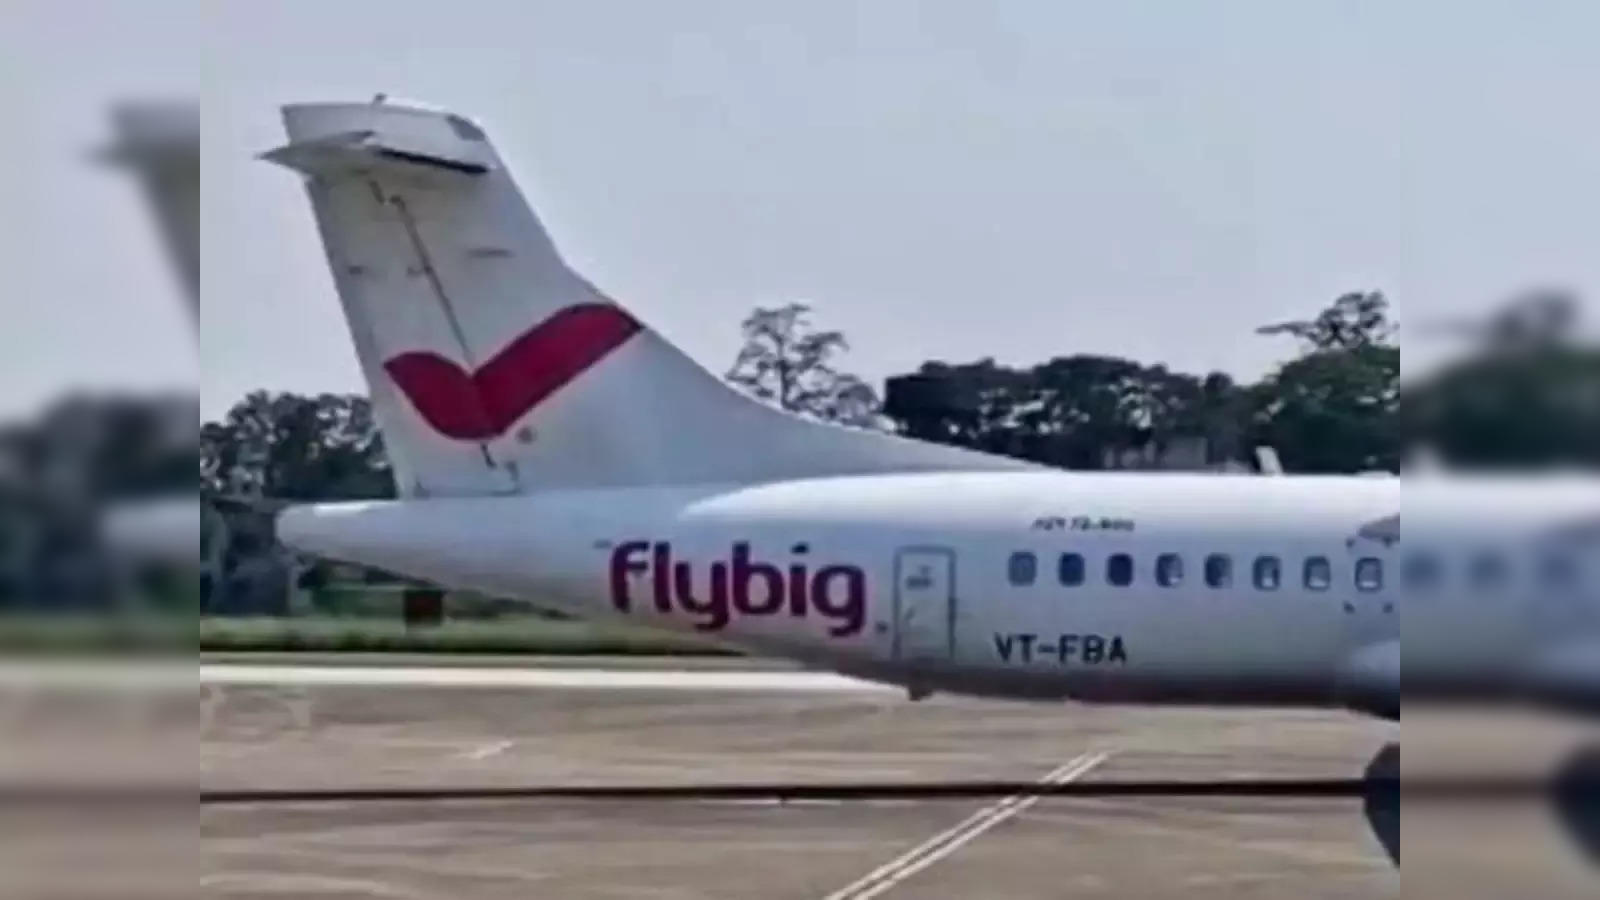 Flybig Airlines: FlyBig to get 10 Otter Series planes - The Economic Times